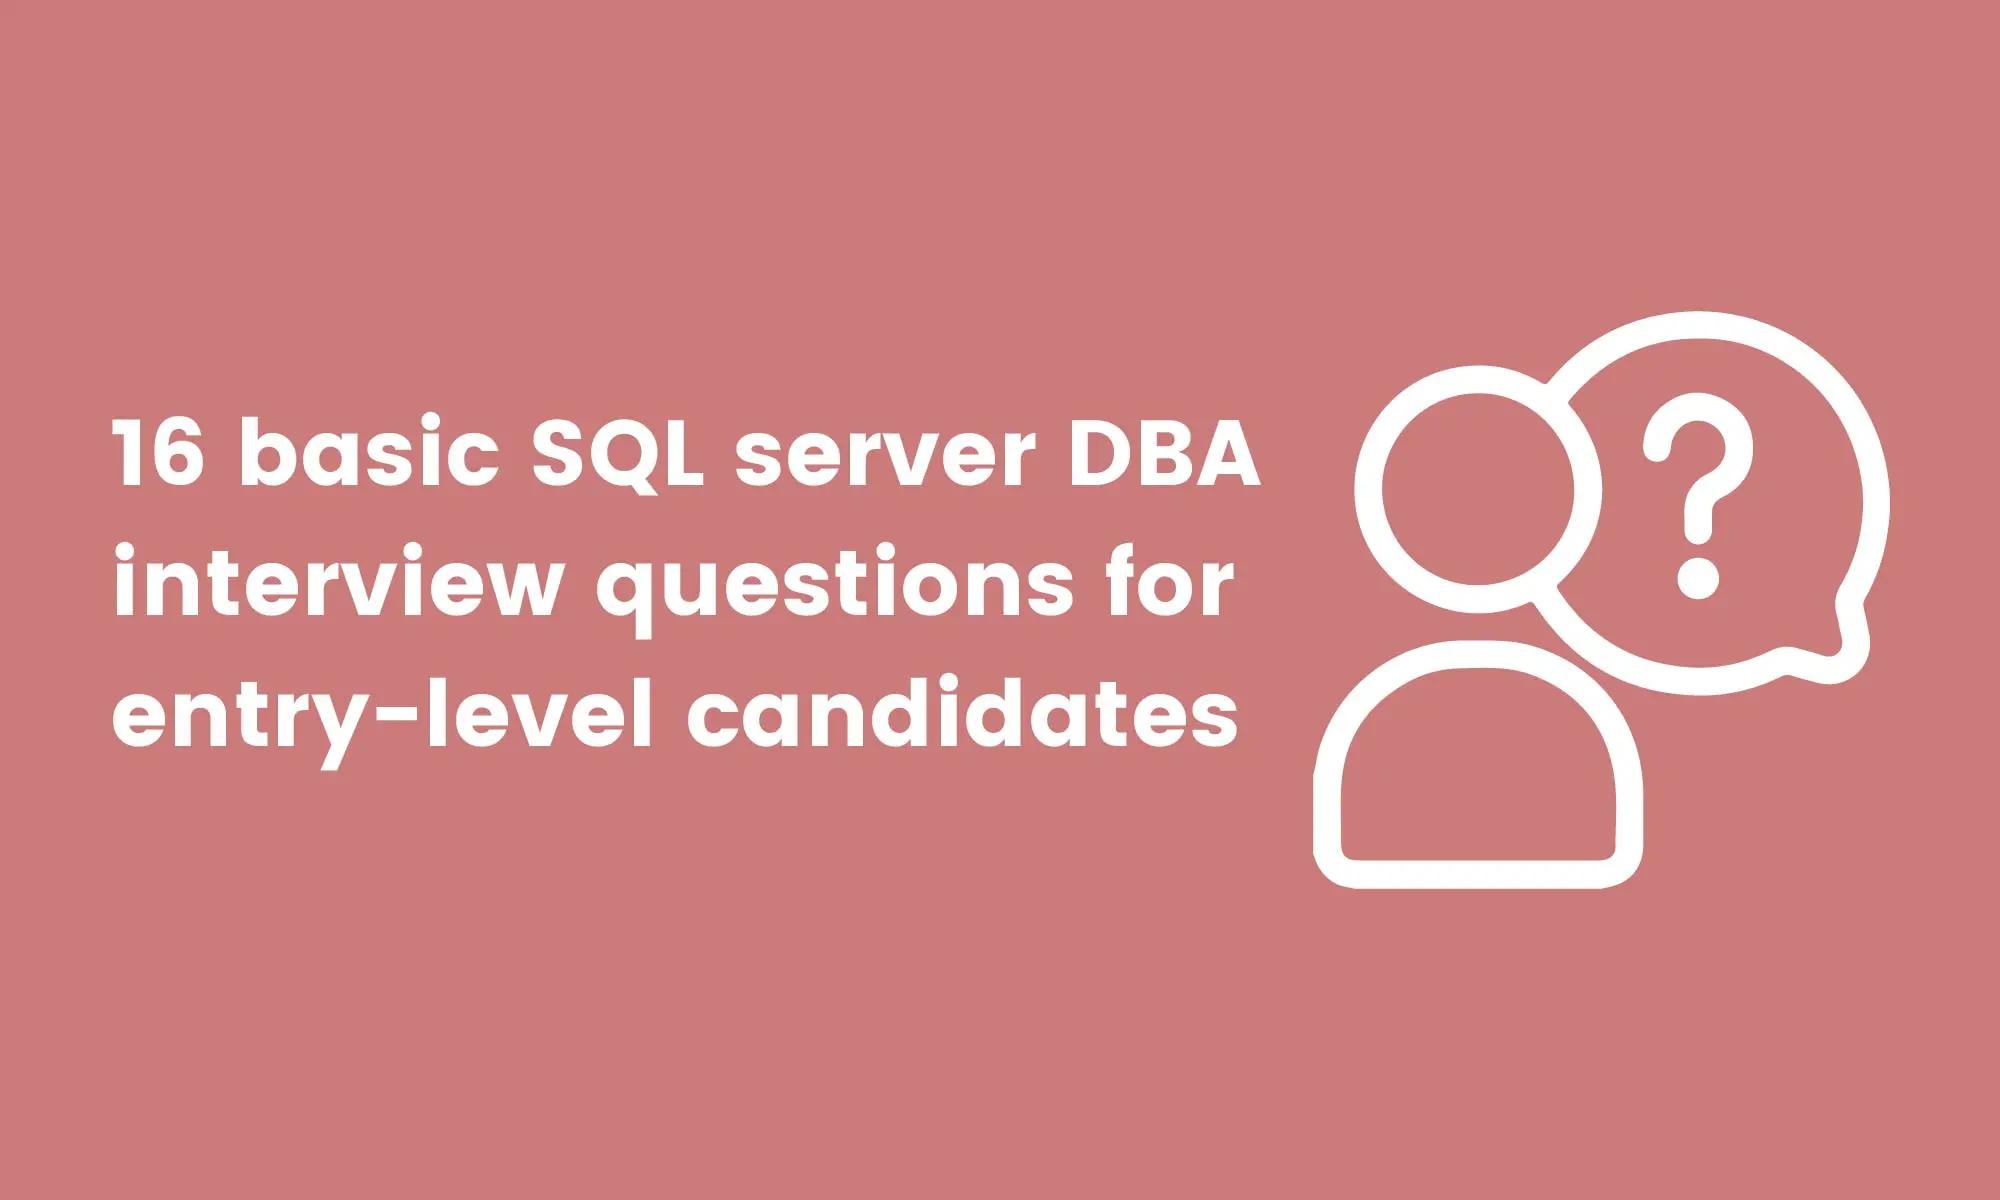 16 basic SQL server DBA interview questions